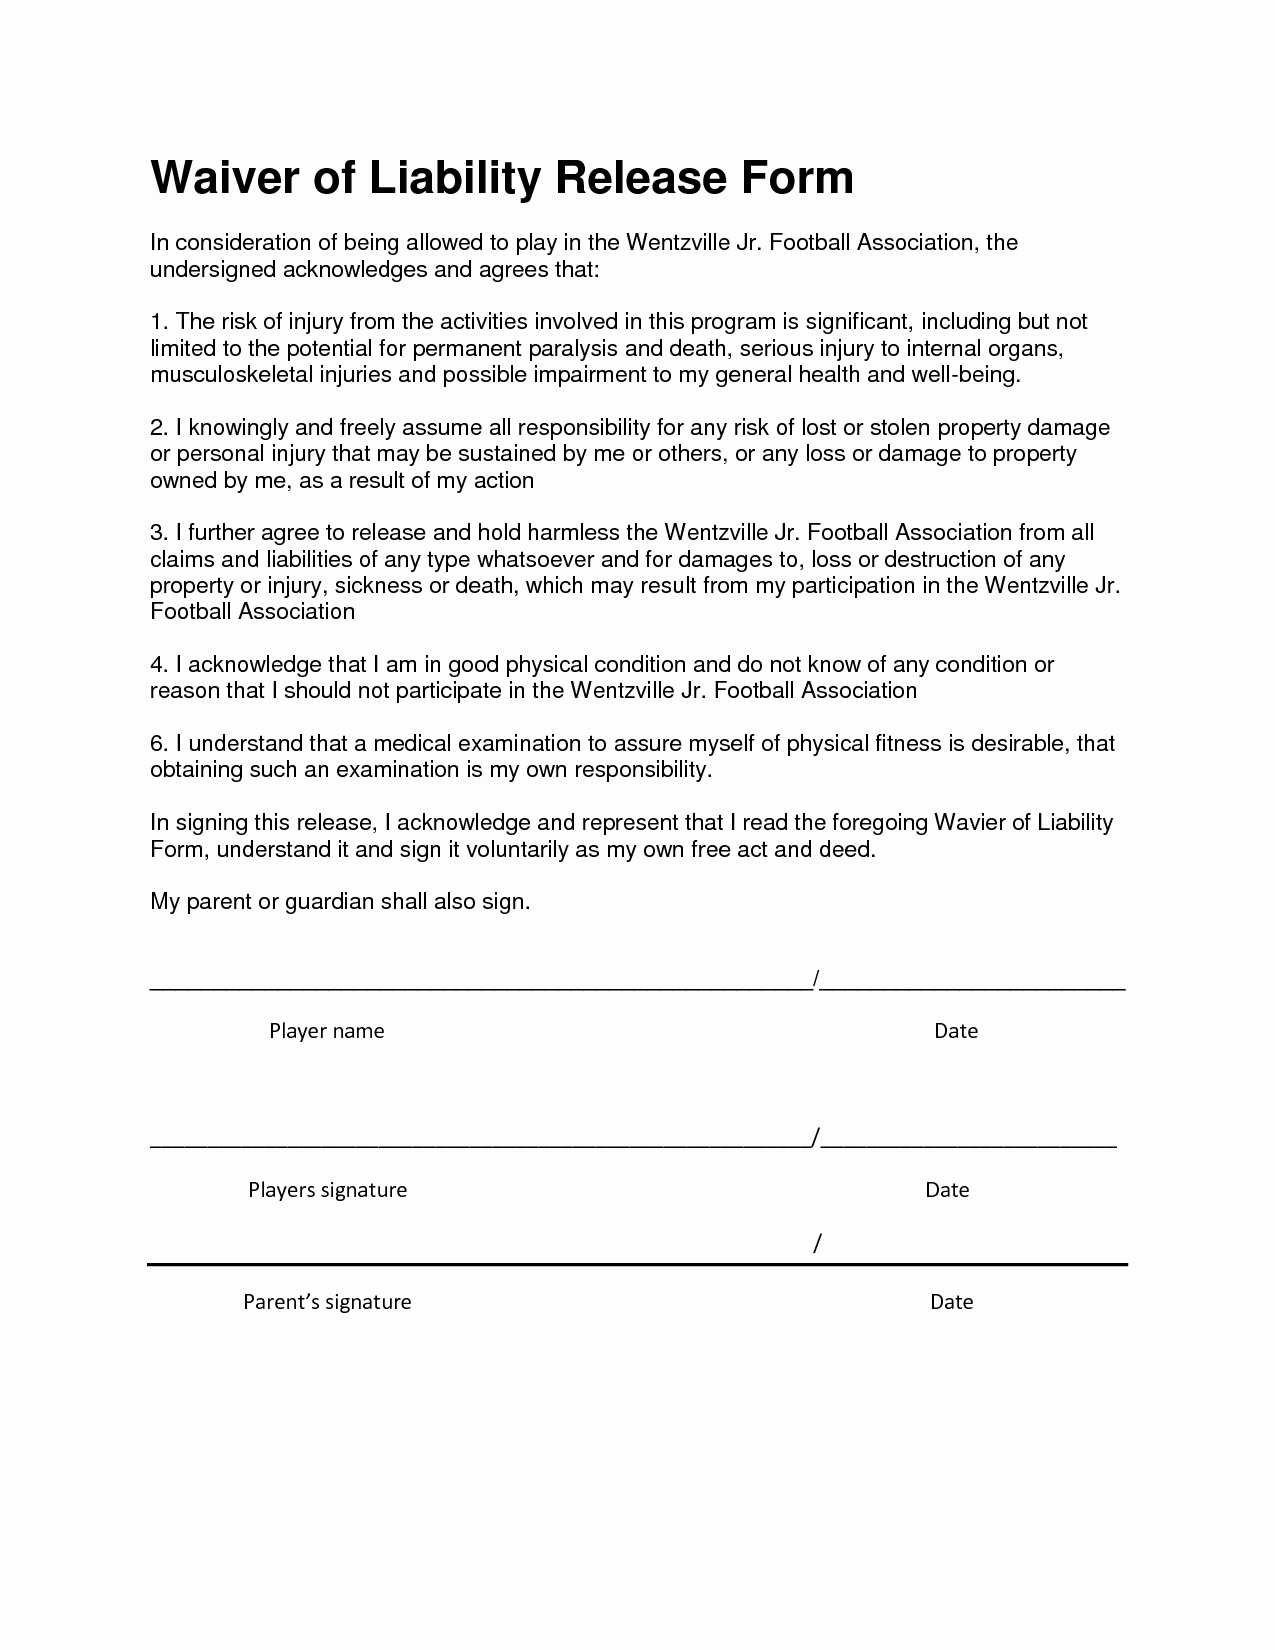 Liability Release form Template Awesome Release and Waiver Liability Agreement Free Printable